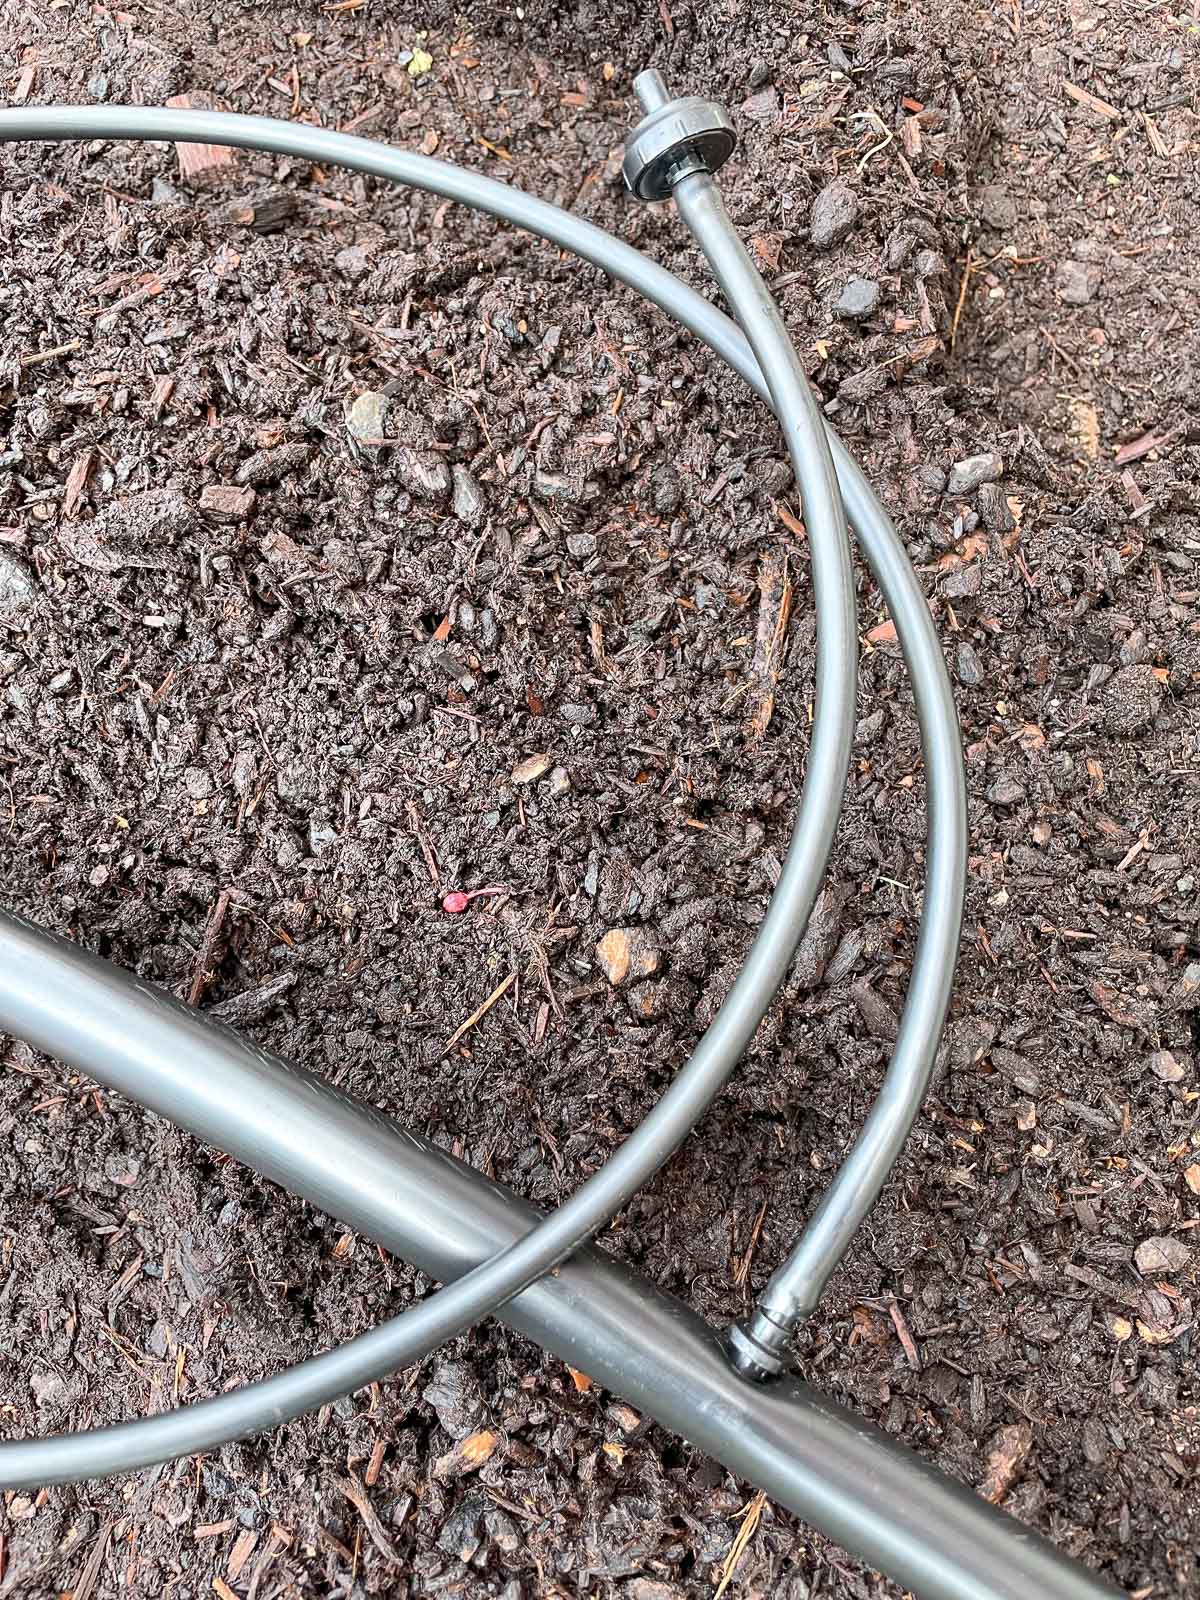 emitter at end of ¼" drip irrigation tubing